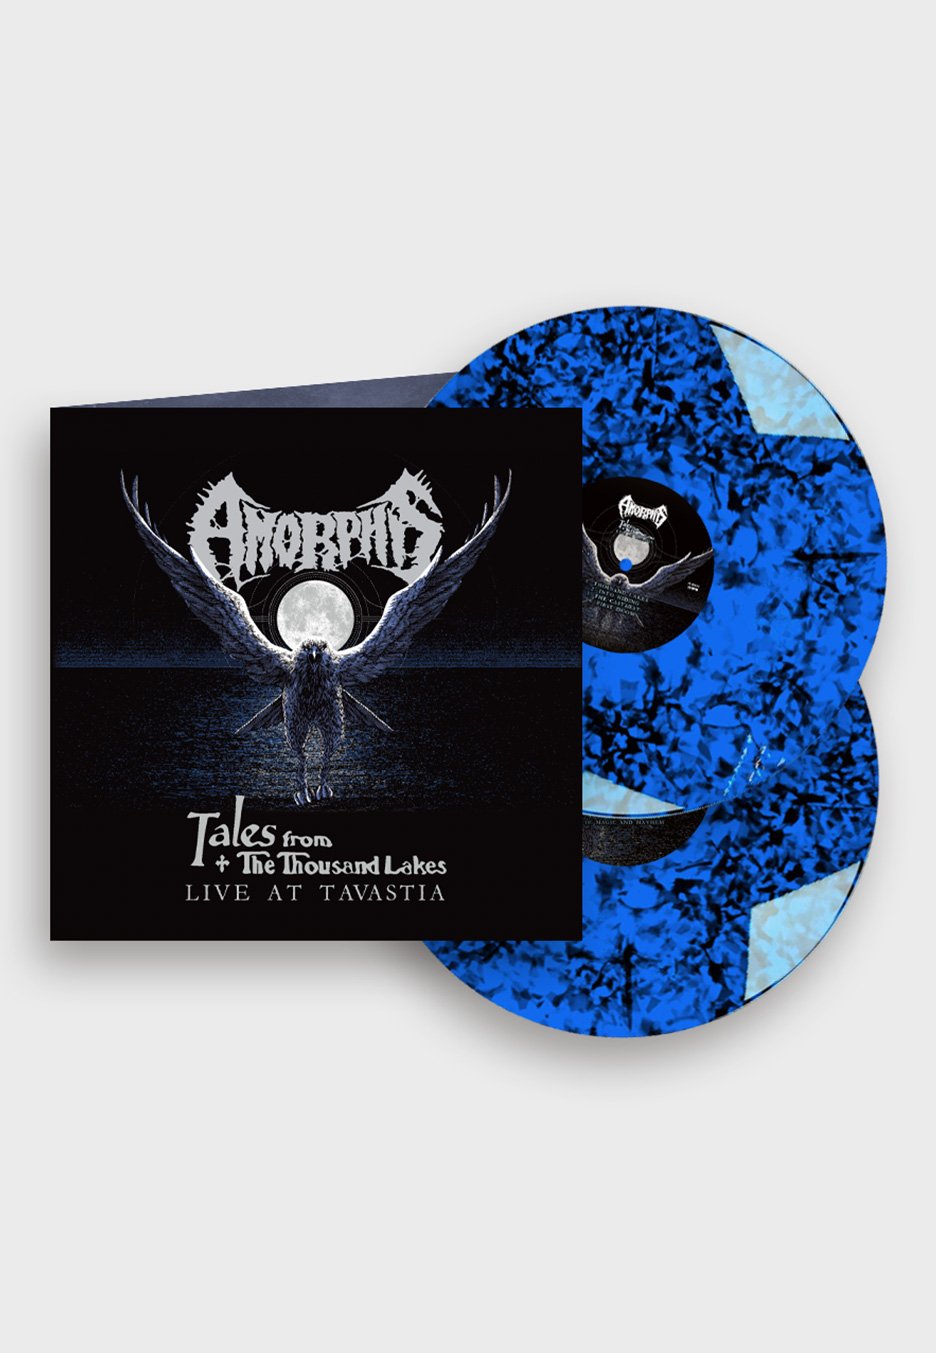 Amorphis - Tales From The Thousand Lakes (Live At Tavastia) Ltd. Blue/Black Dust - Colored 2 Vinyl